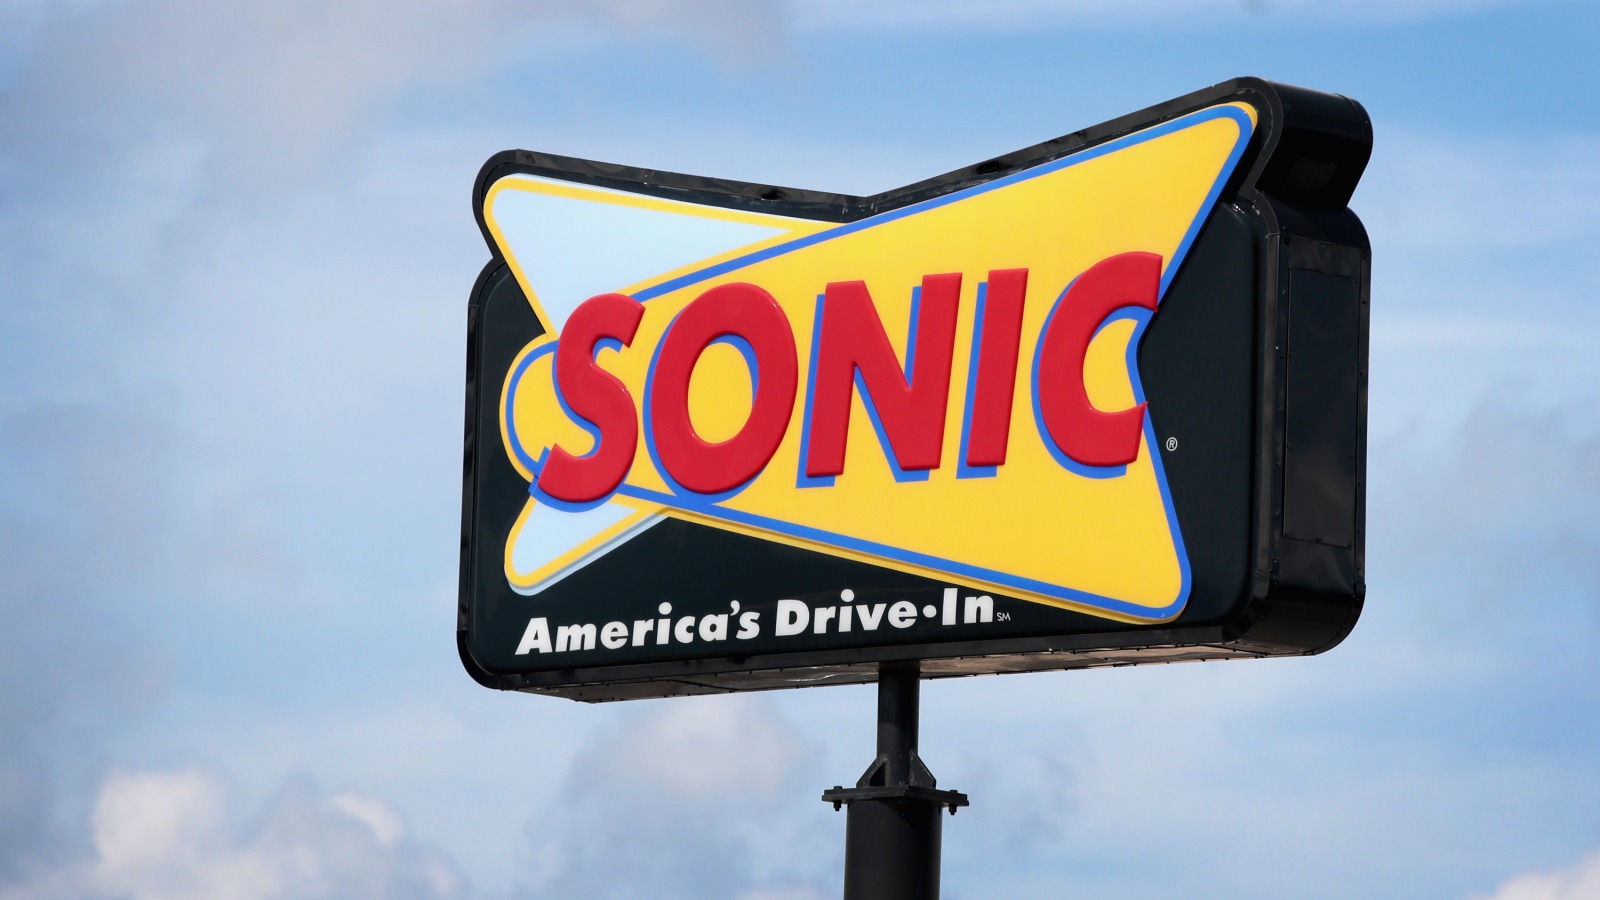 Sonic Is Struggling To Stay In Business. Here's Why